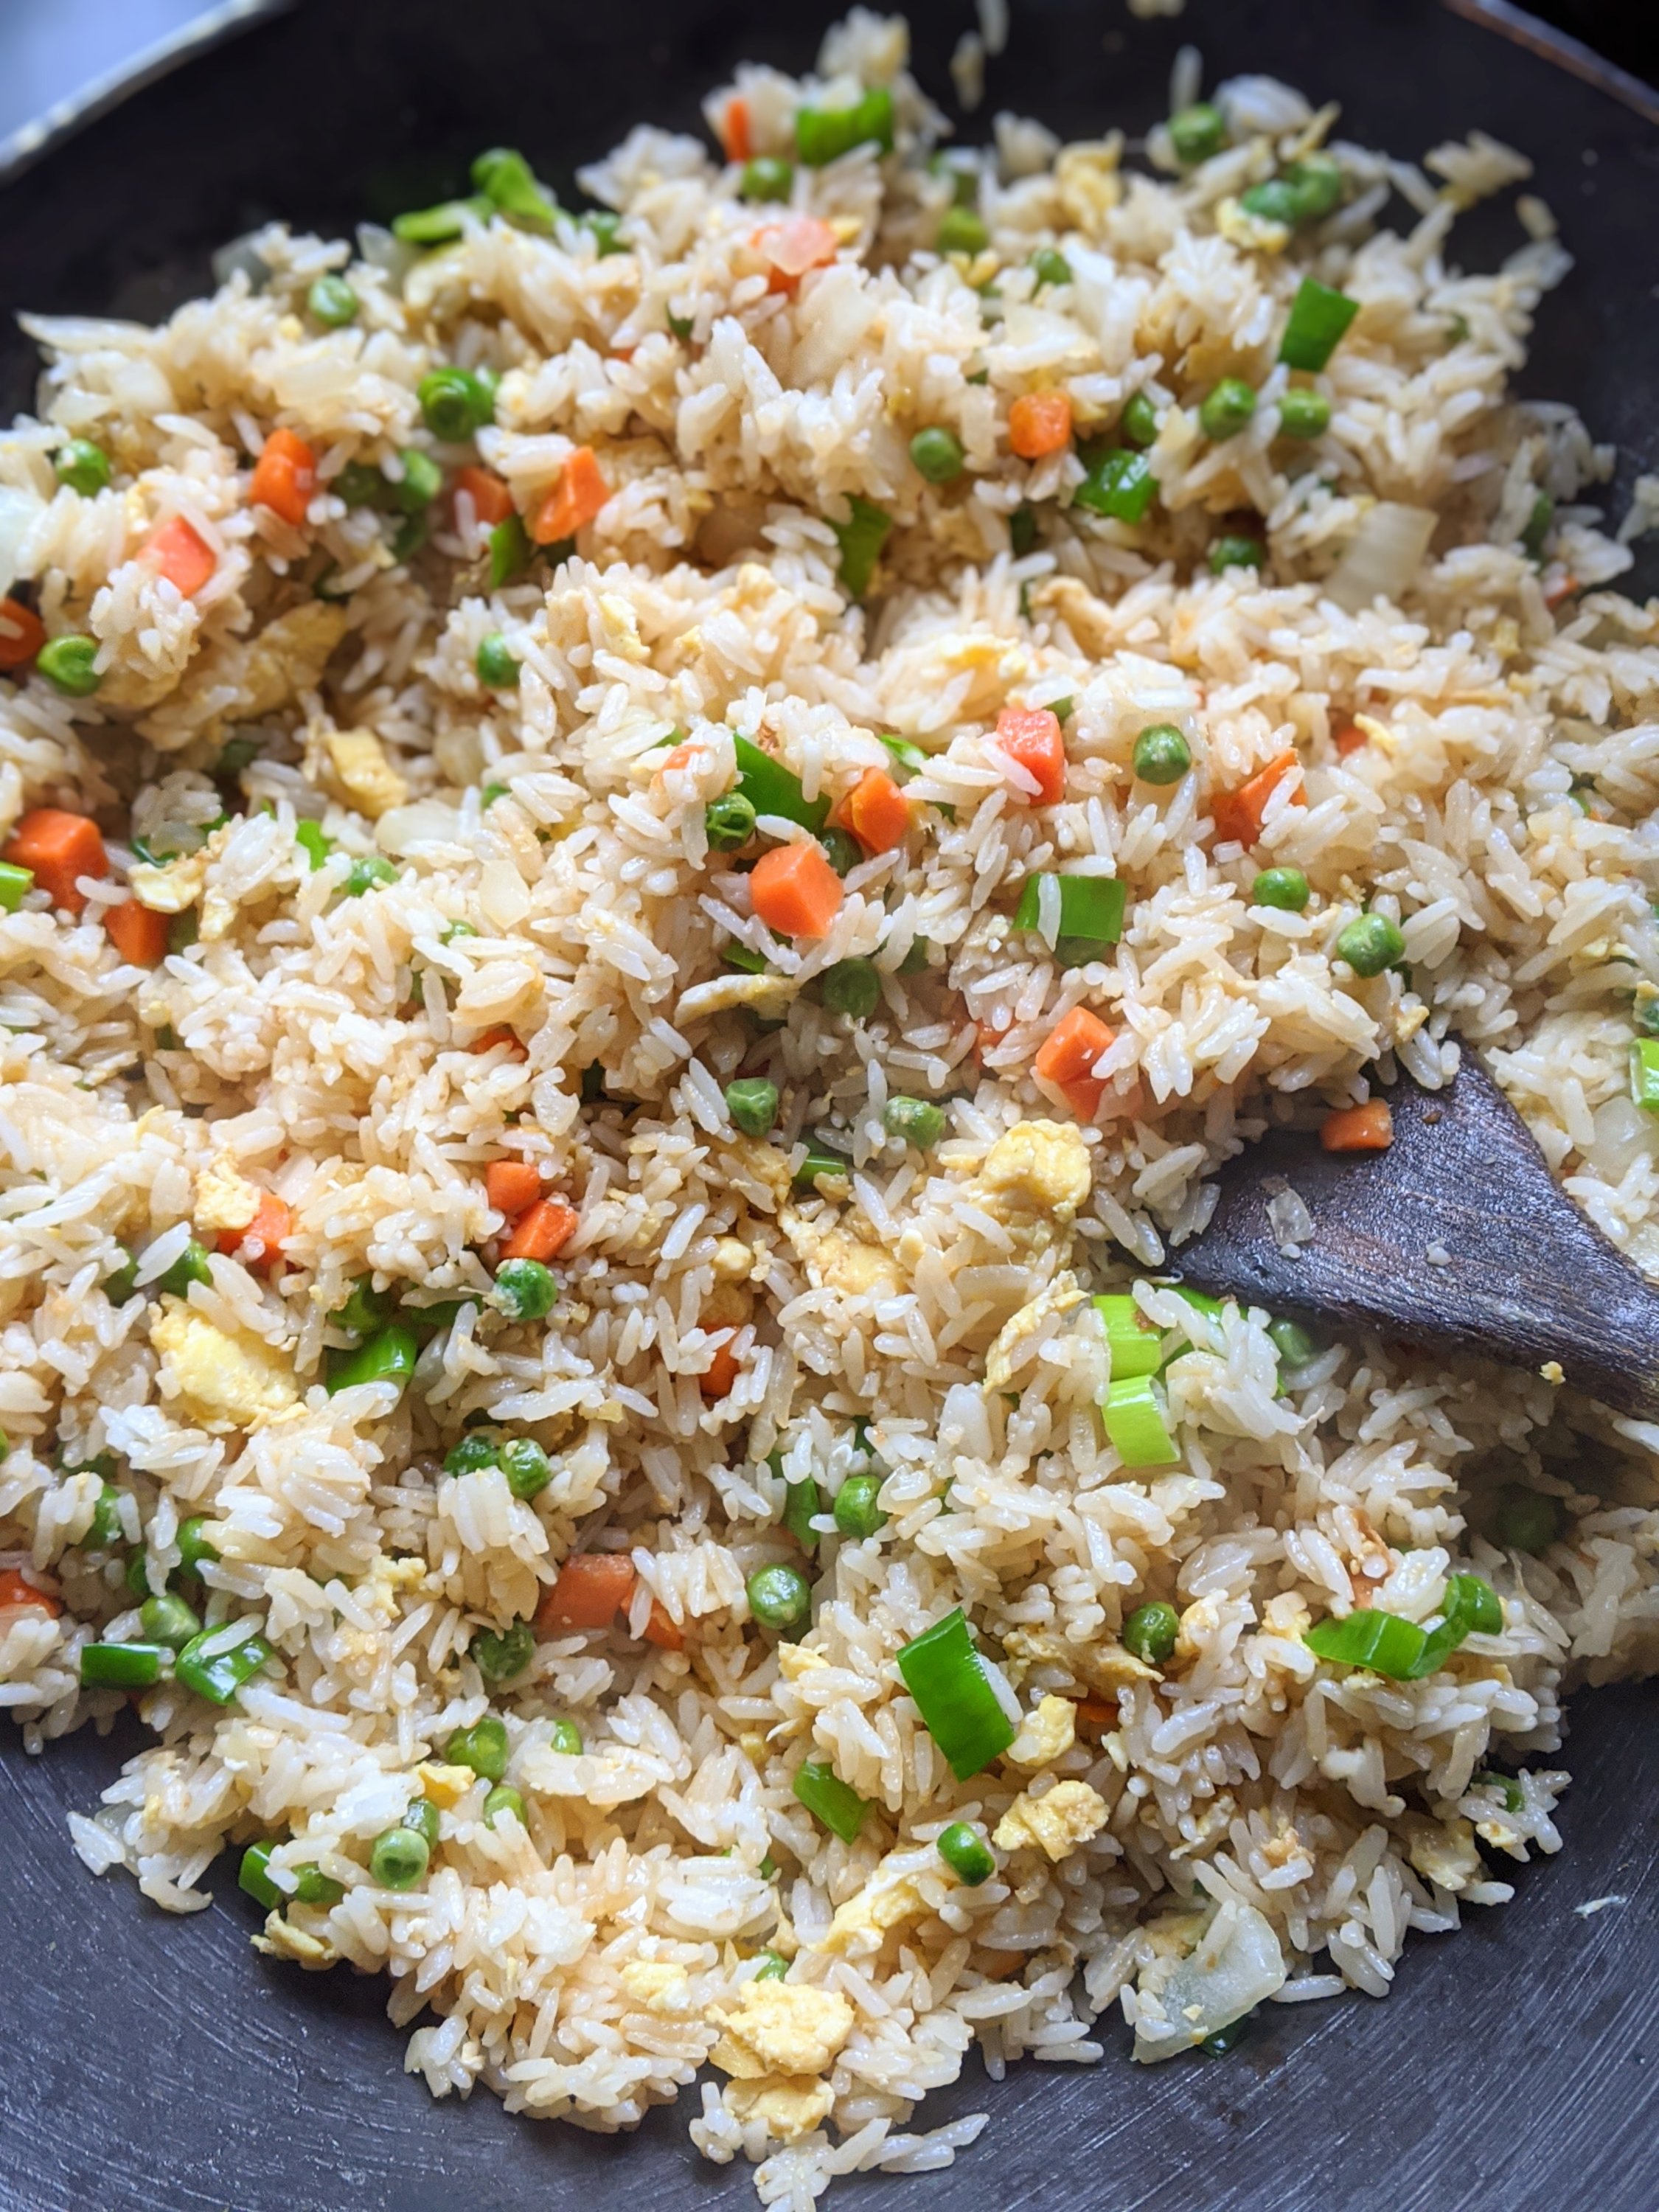 leftover fried rice recipe using old dry rice vegan gluten free vegetarian recipes with old rice